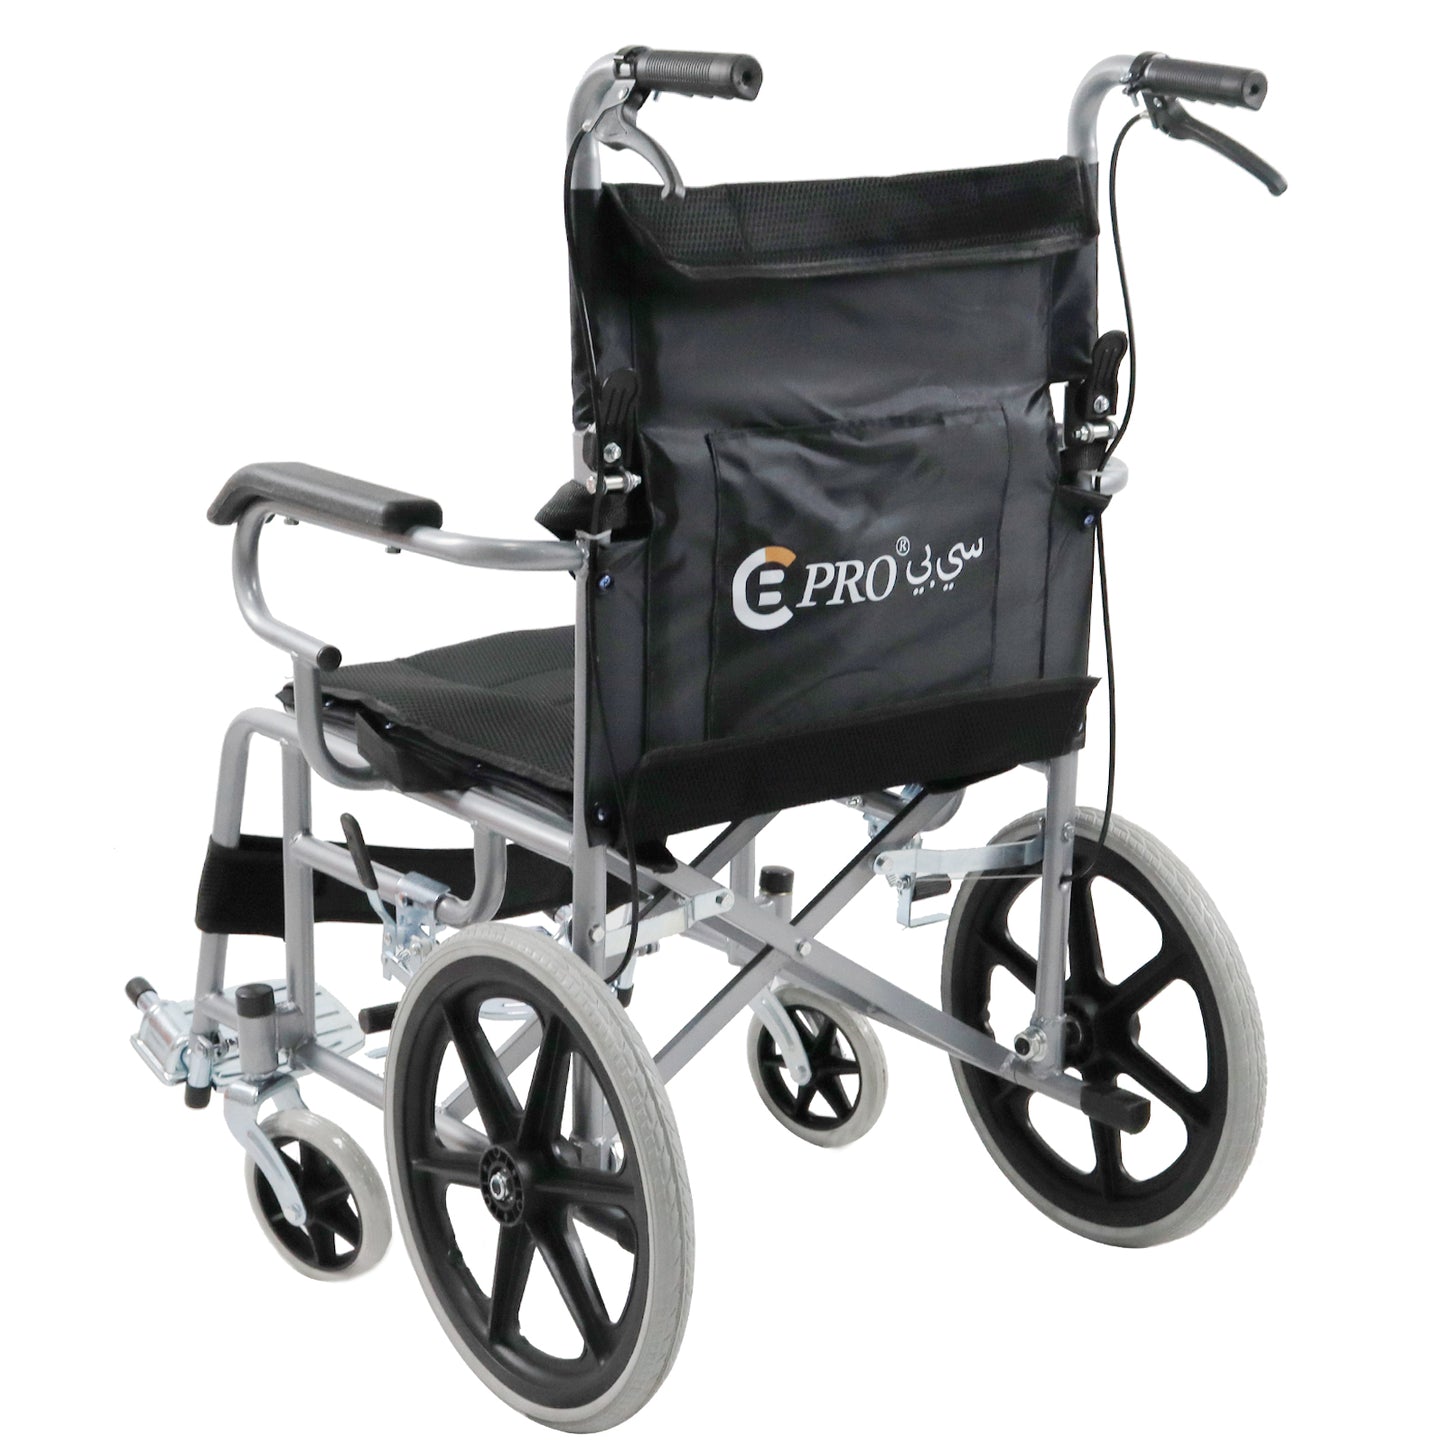 COOLBABY QBLY02: Foldable Lightweight Wheelchair for Elderly and Disabled with Handbrakes - Enhanced Mobility! - COOLBABY